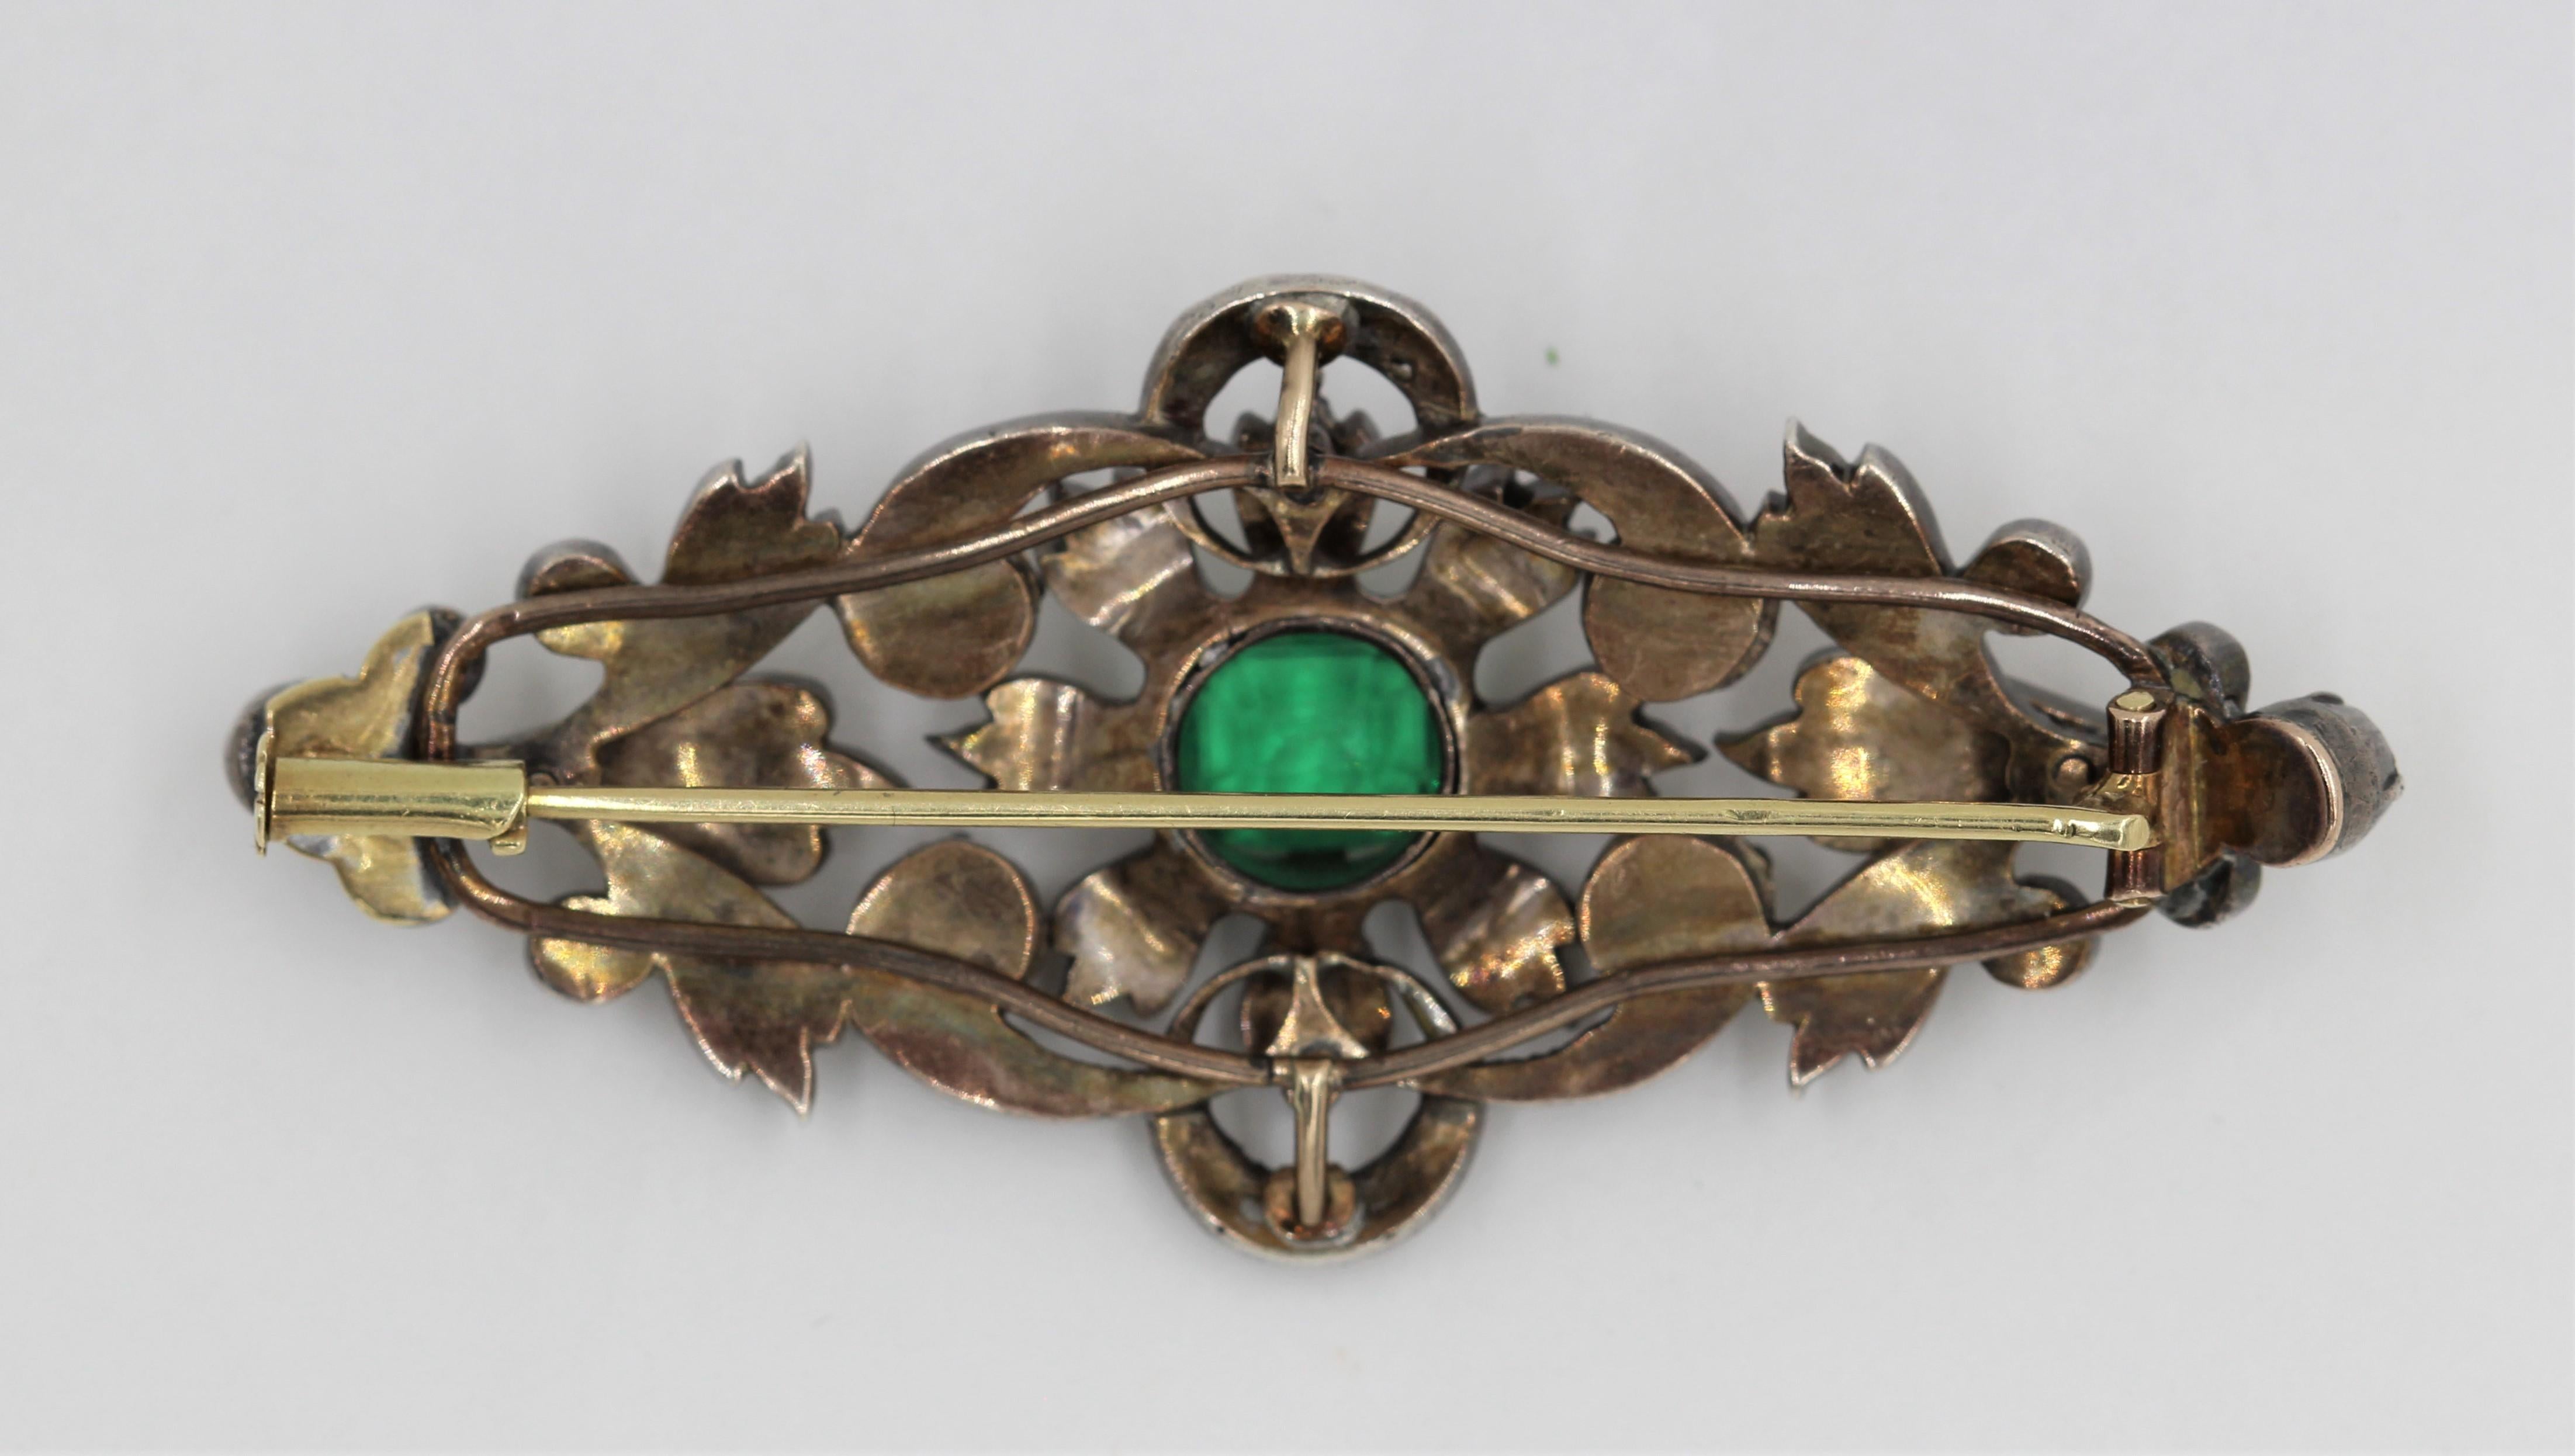 Fabulous Vintage Turn of the century 14k yellow gold and silver pin with 38 Rose Cut & Old Mine cut diamonds with a center Emerald Cut Emerald weighing approximately 2 Carats.
This old Antique pin is fashioned out of both Gold and Silver metals and